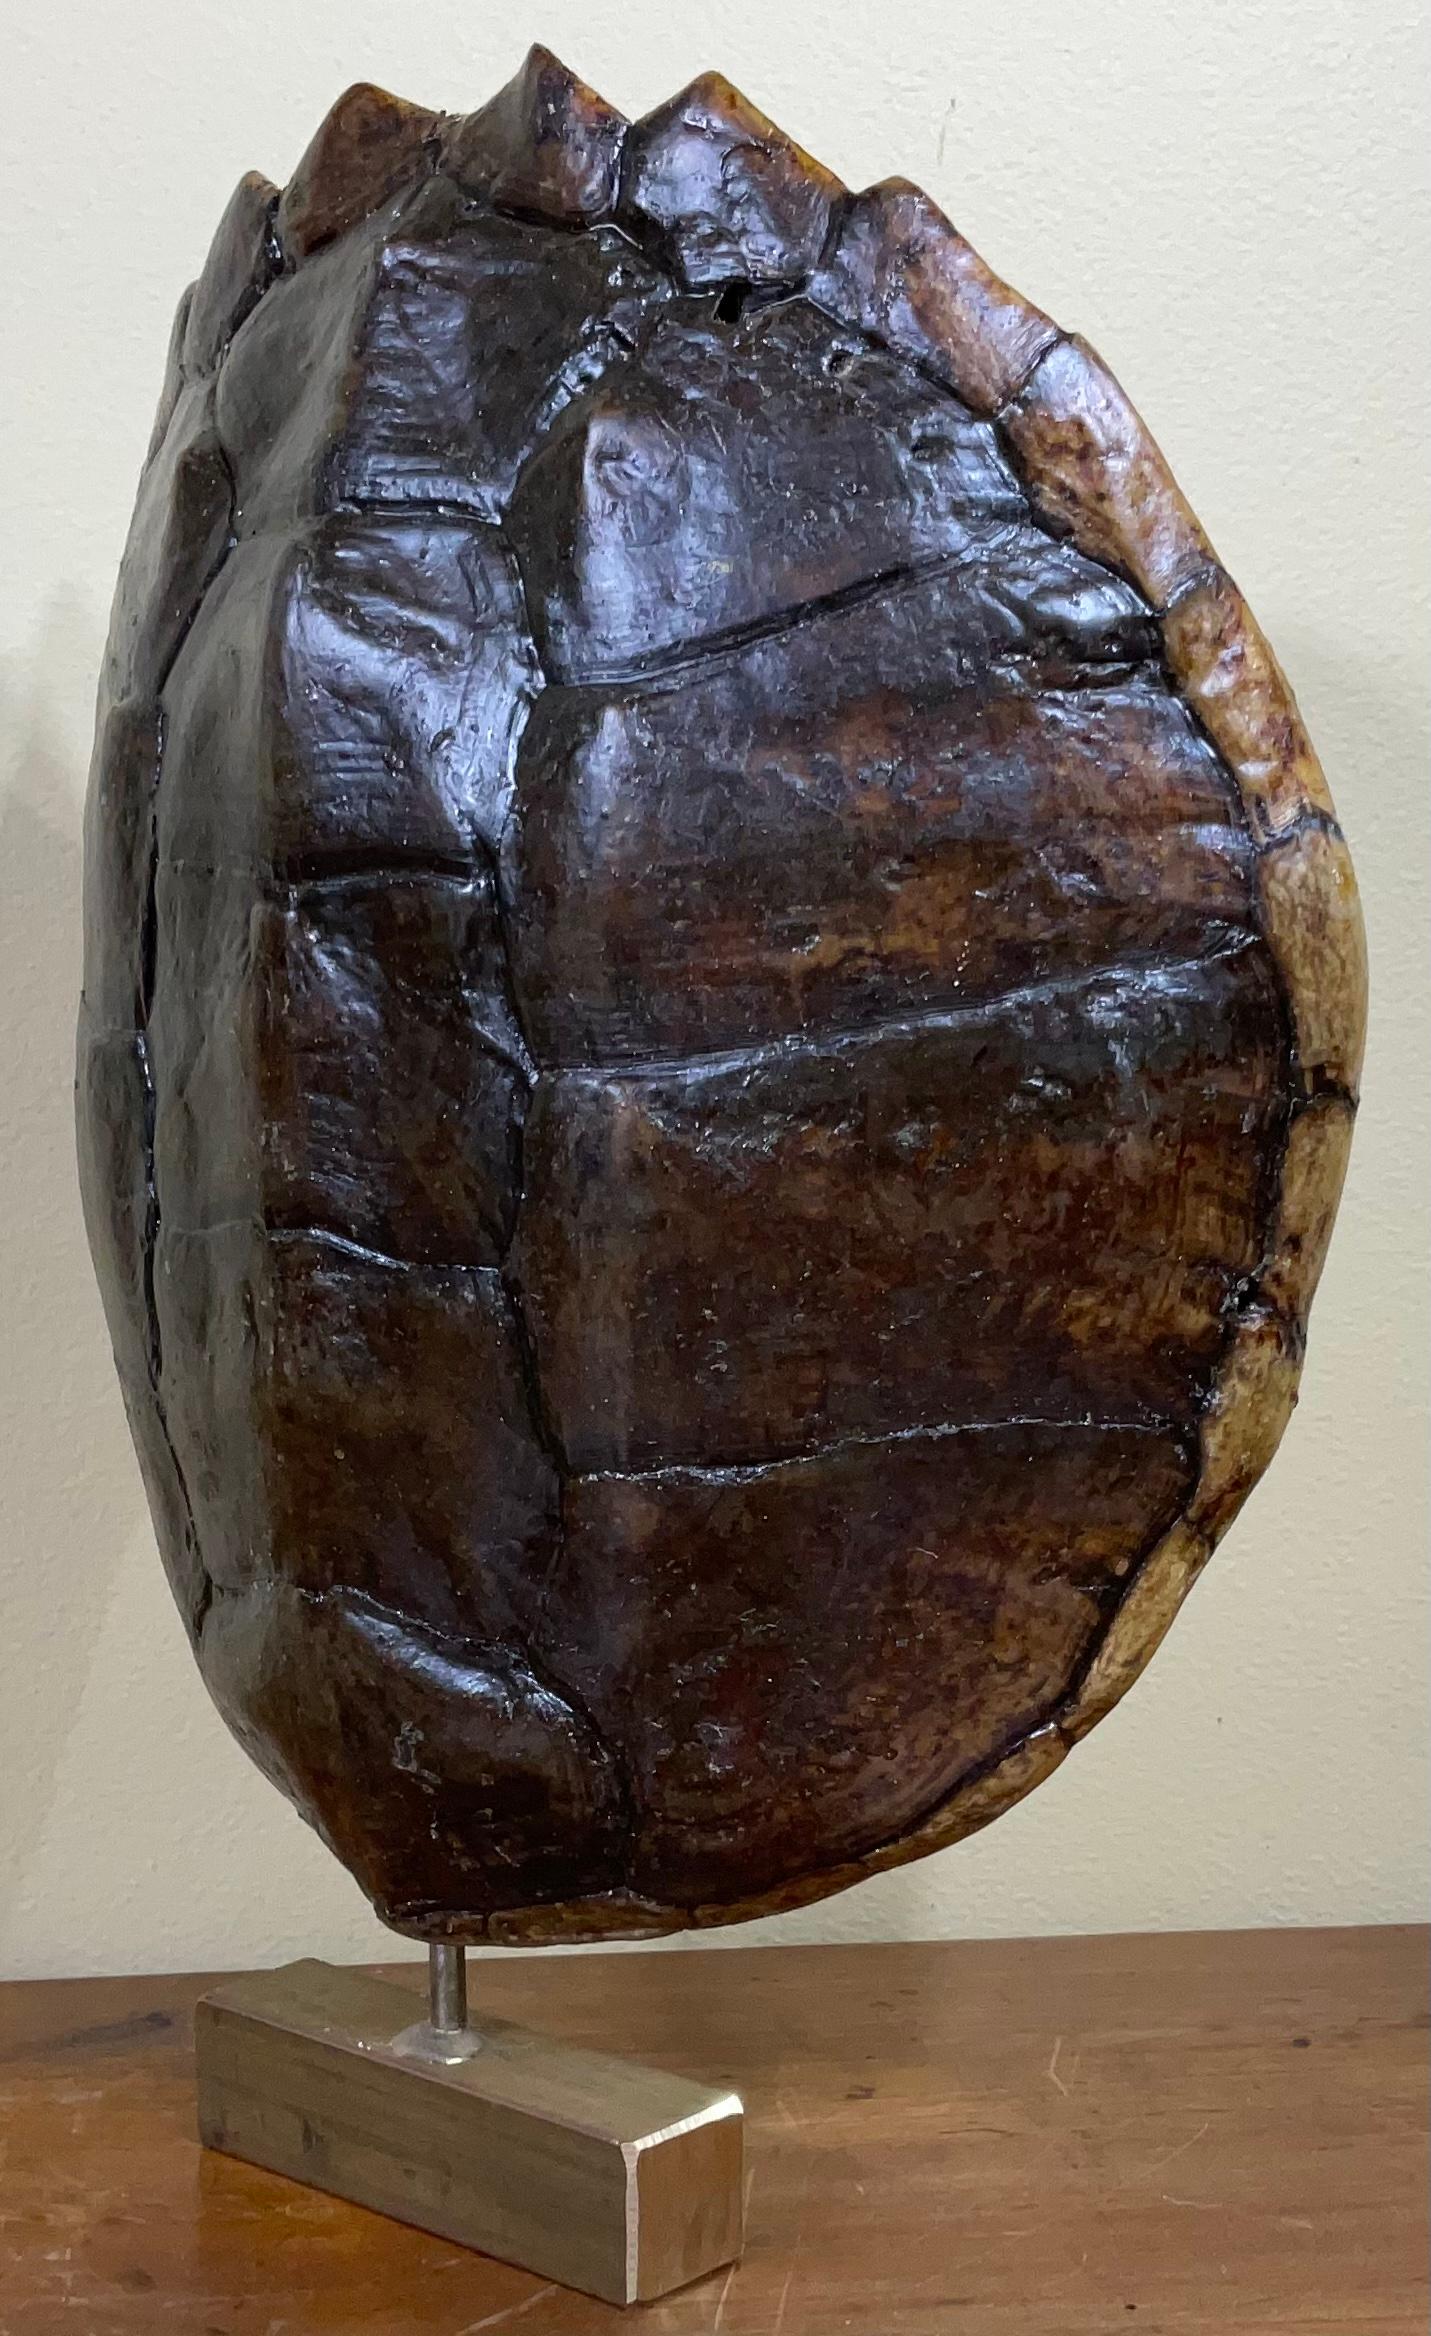 Decorative fresh water turtle shell professionally mounted on solid brass base, the shell is cleaned and seal with clear protective satin finish.
And the back is upholstered with fine fabric. Beautiful natural piece of art for display.